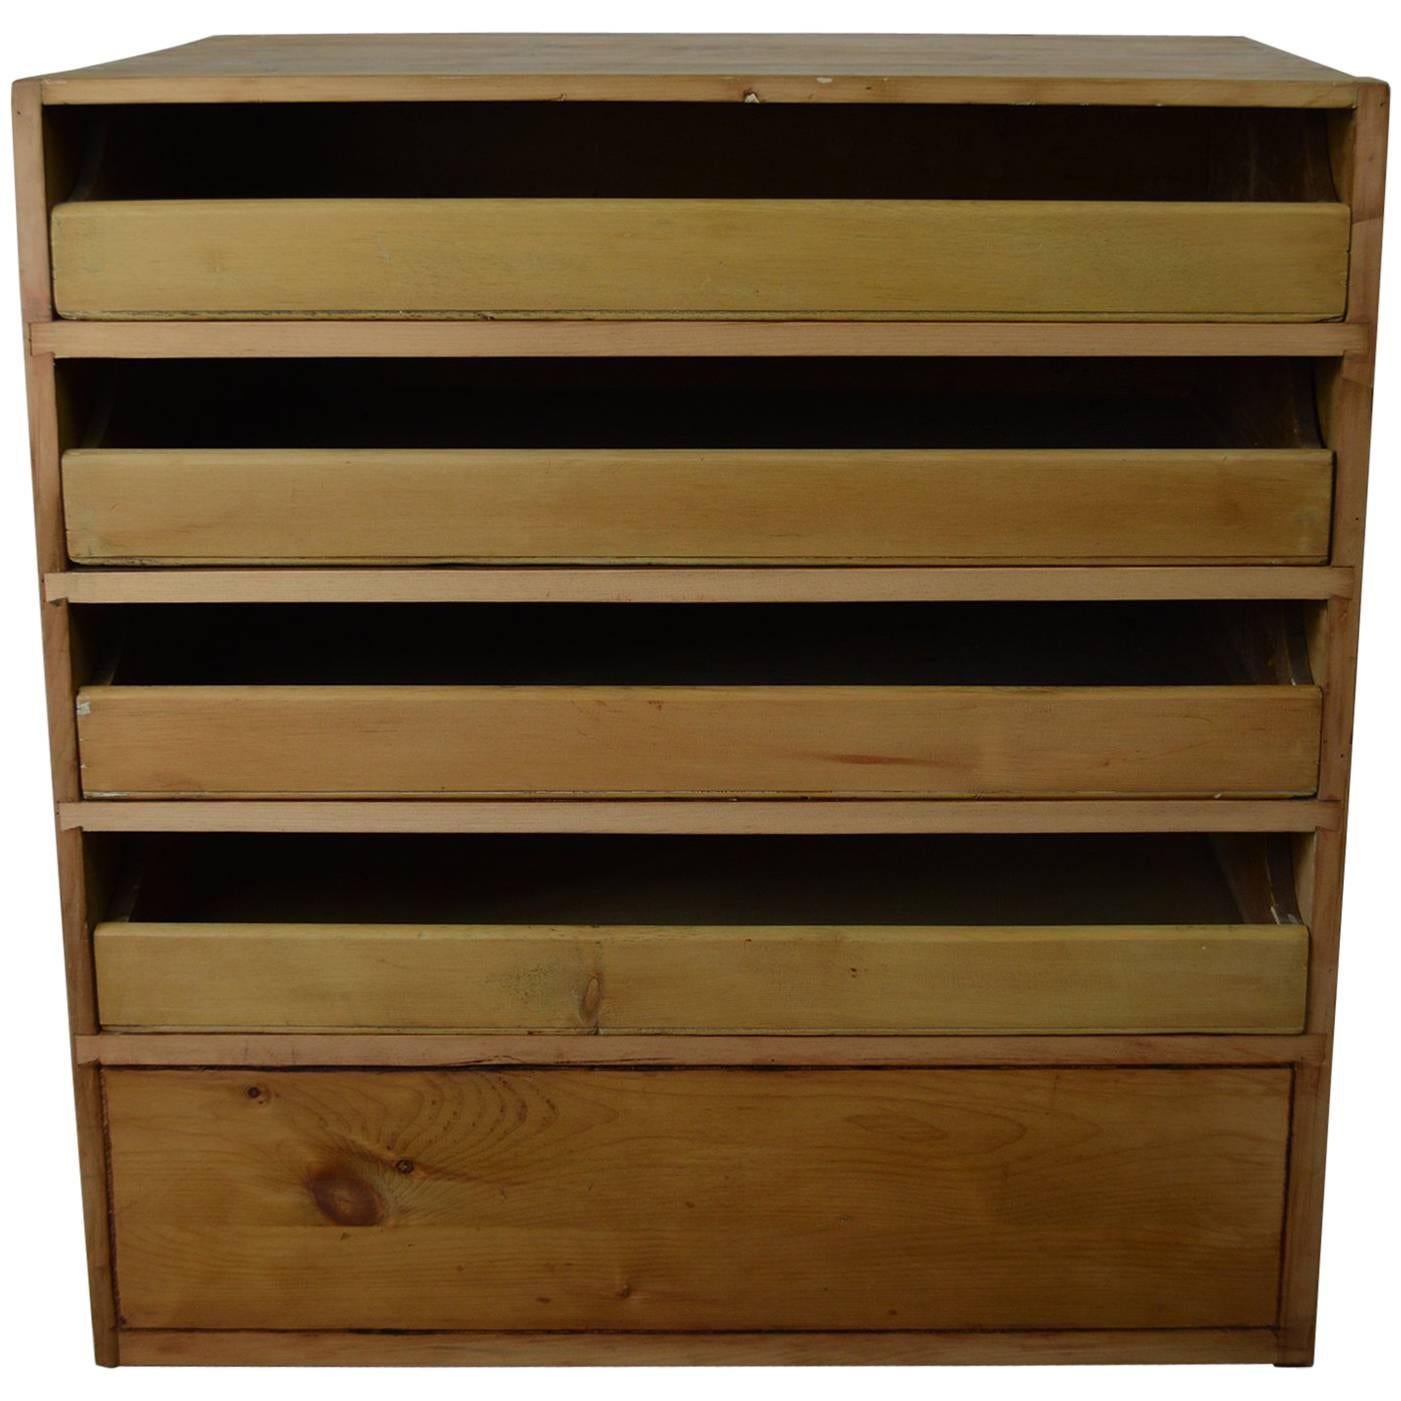 Antique Pine Plan or Architects Chest, English, 19th Century